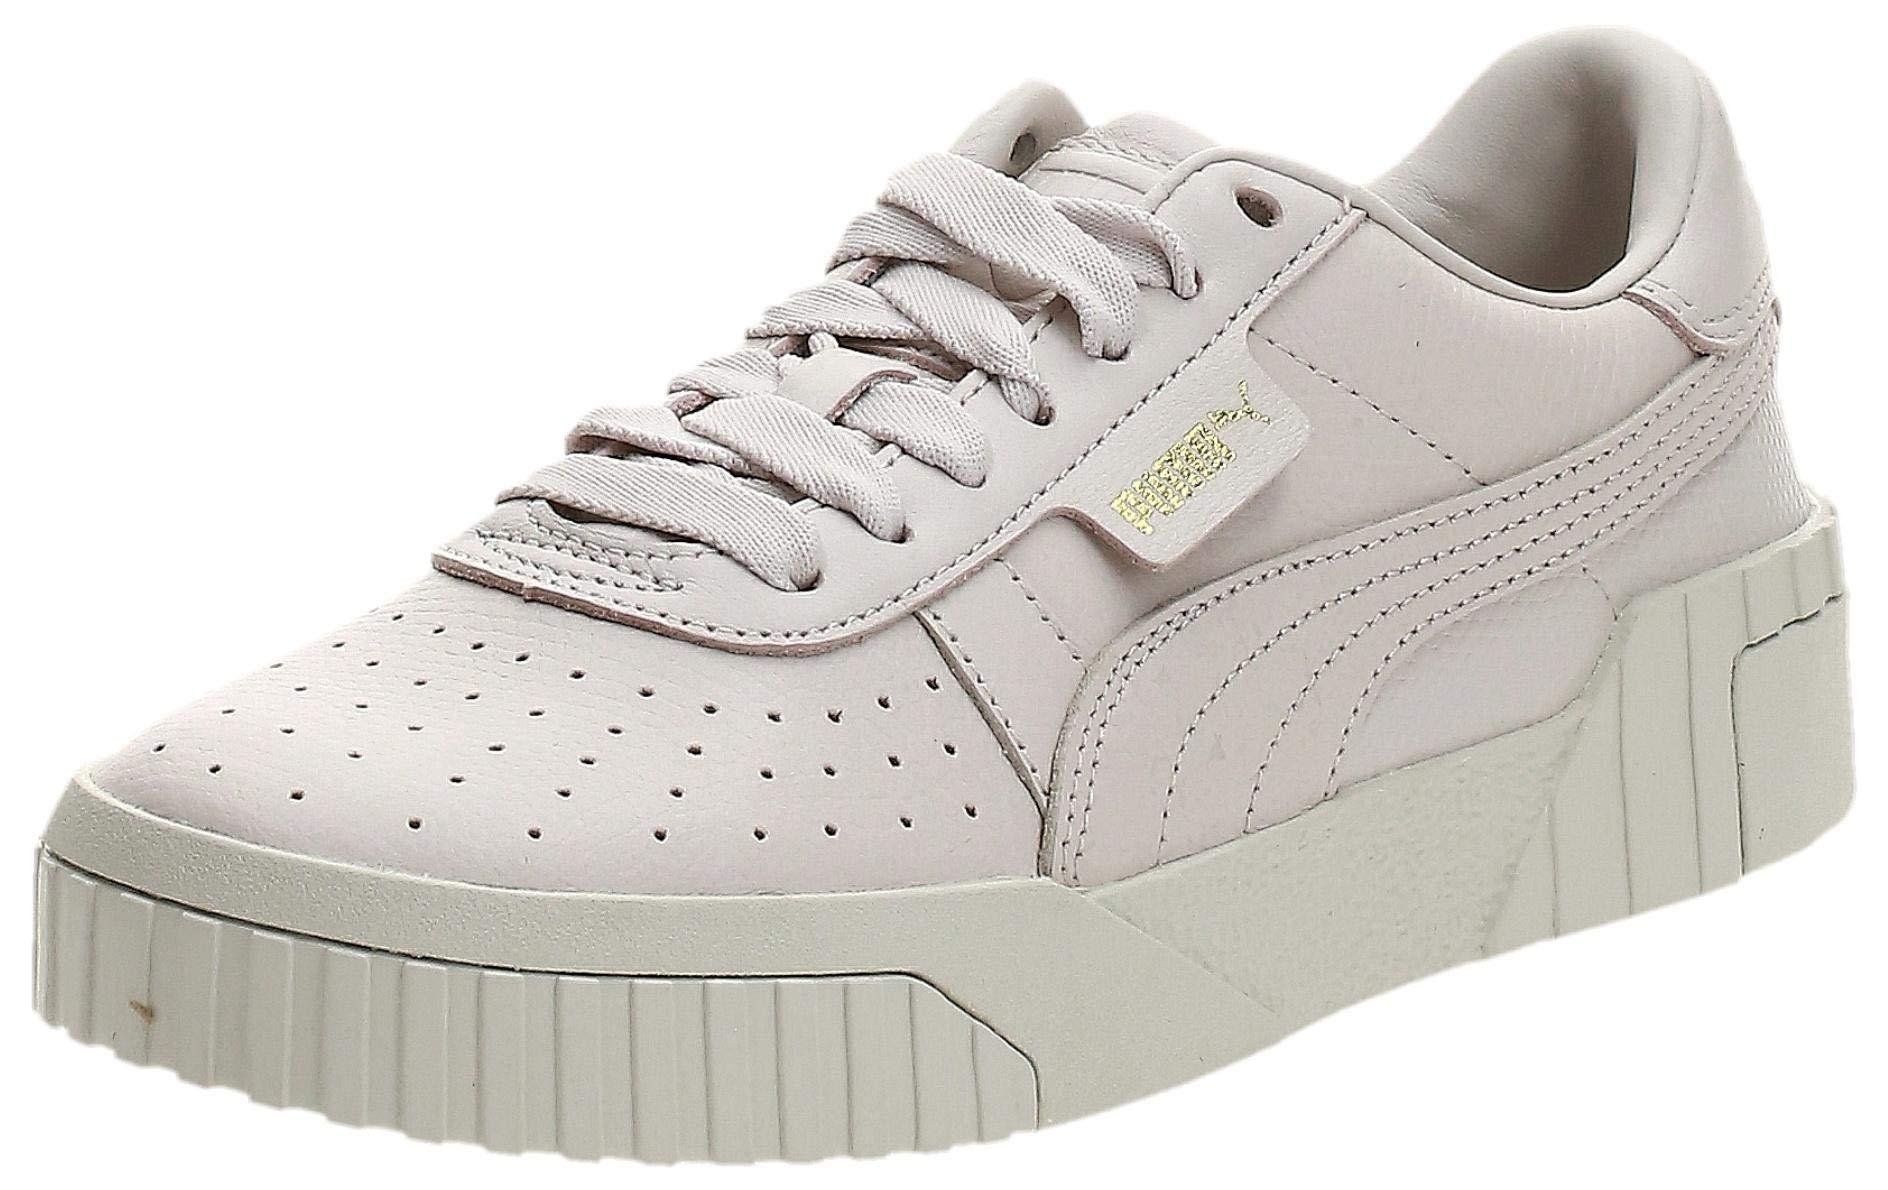 PUMA Leather Cali Emboss Wn's Low-top Trainers in Pink Pastel Parchment 06  (Metallic) - Save 59% - Lyst